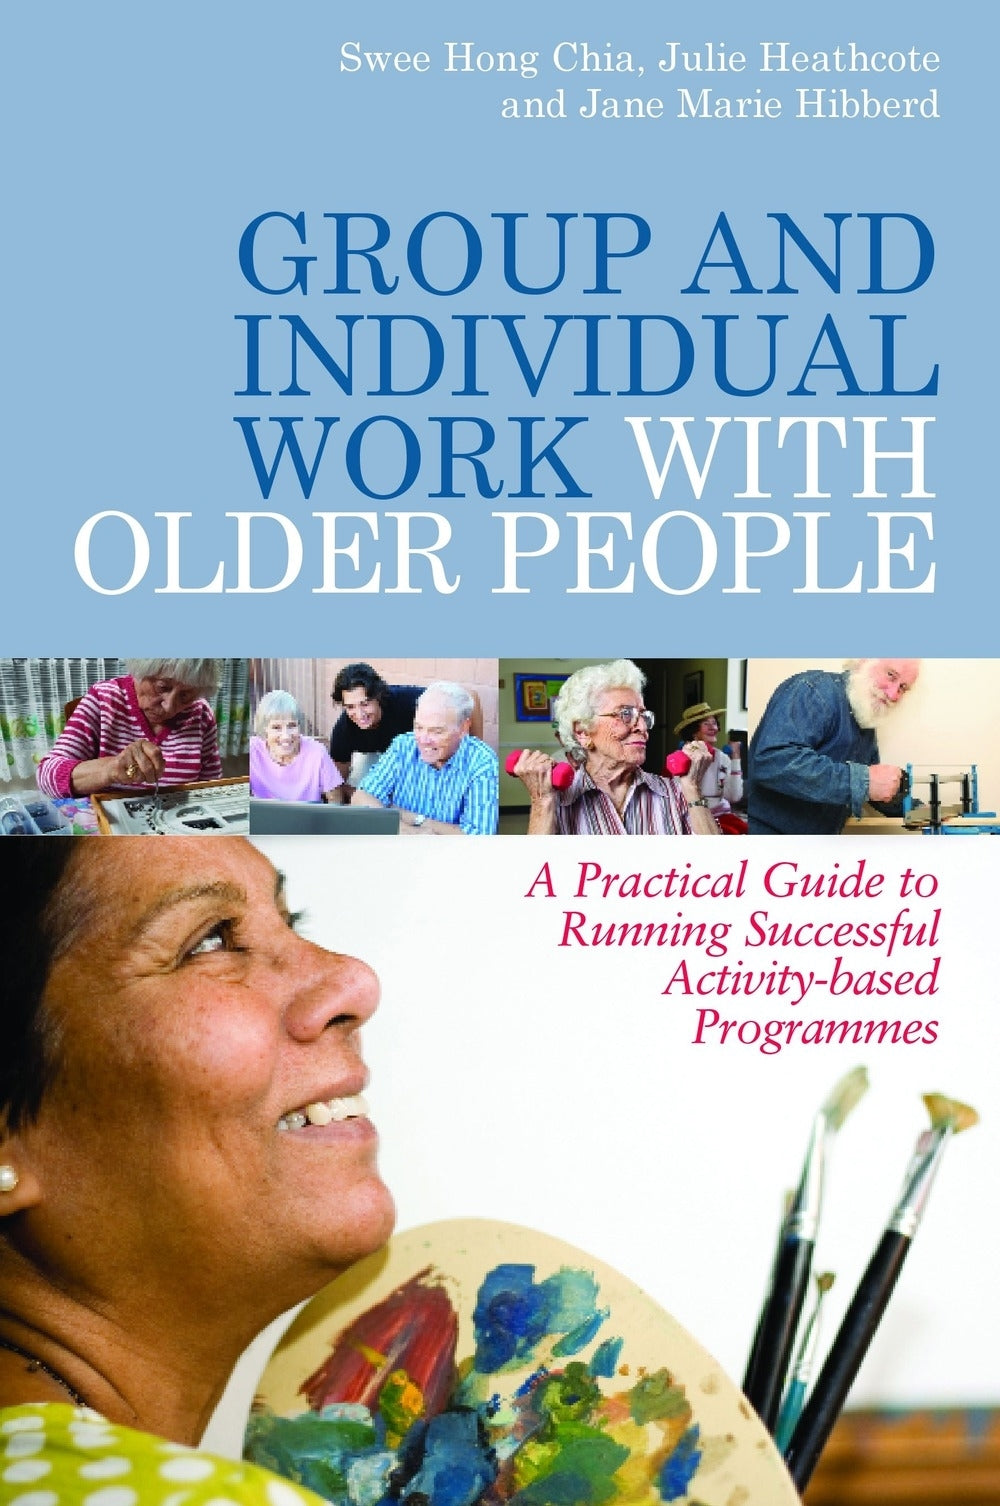 Group and Individual Work with Older People by Julie Heathcote, Swee Hong Chia, Jane Hibberd